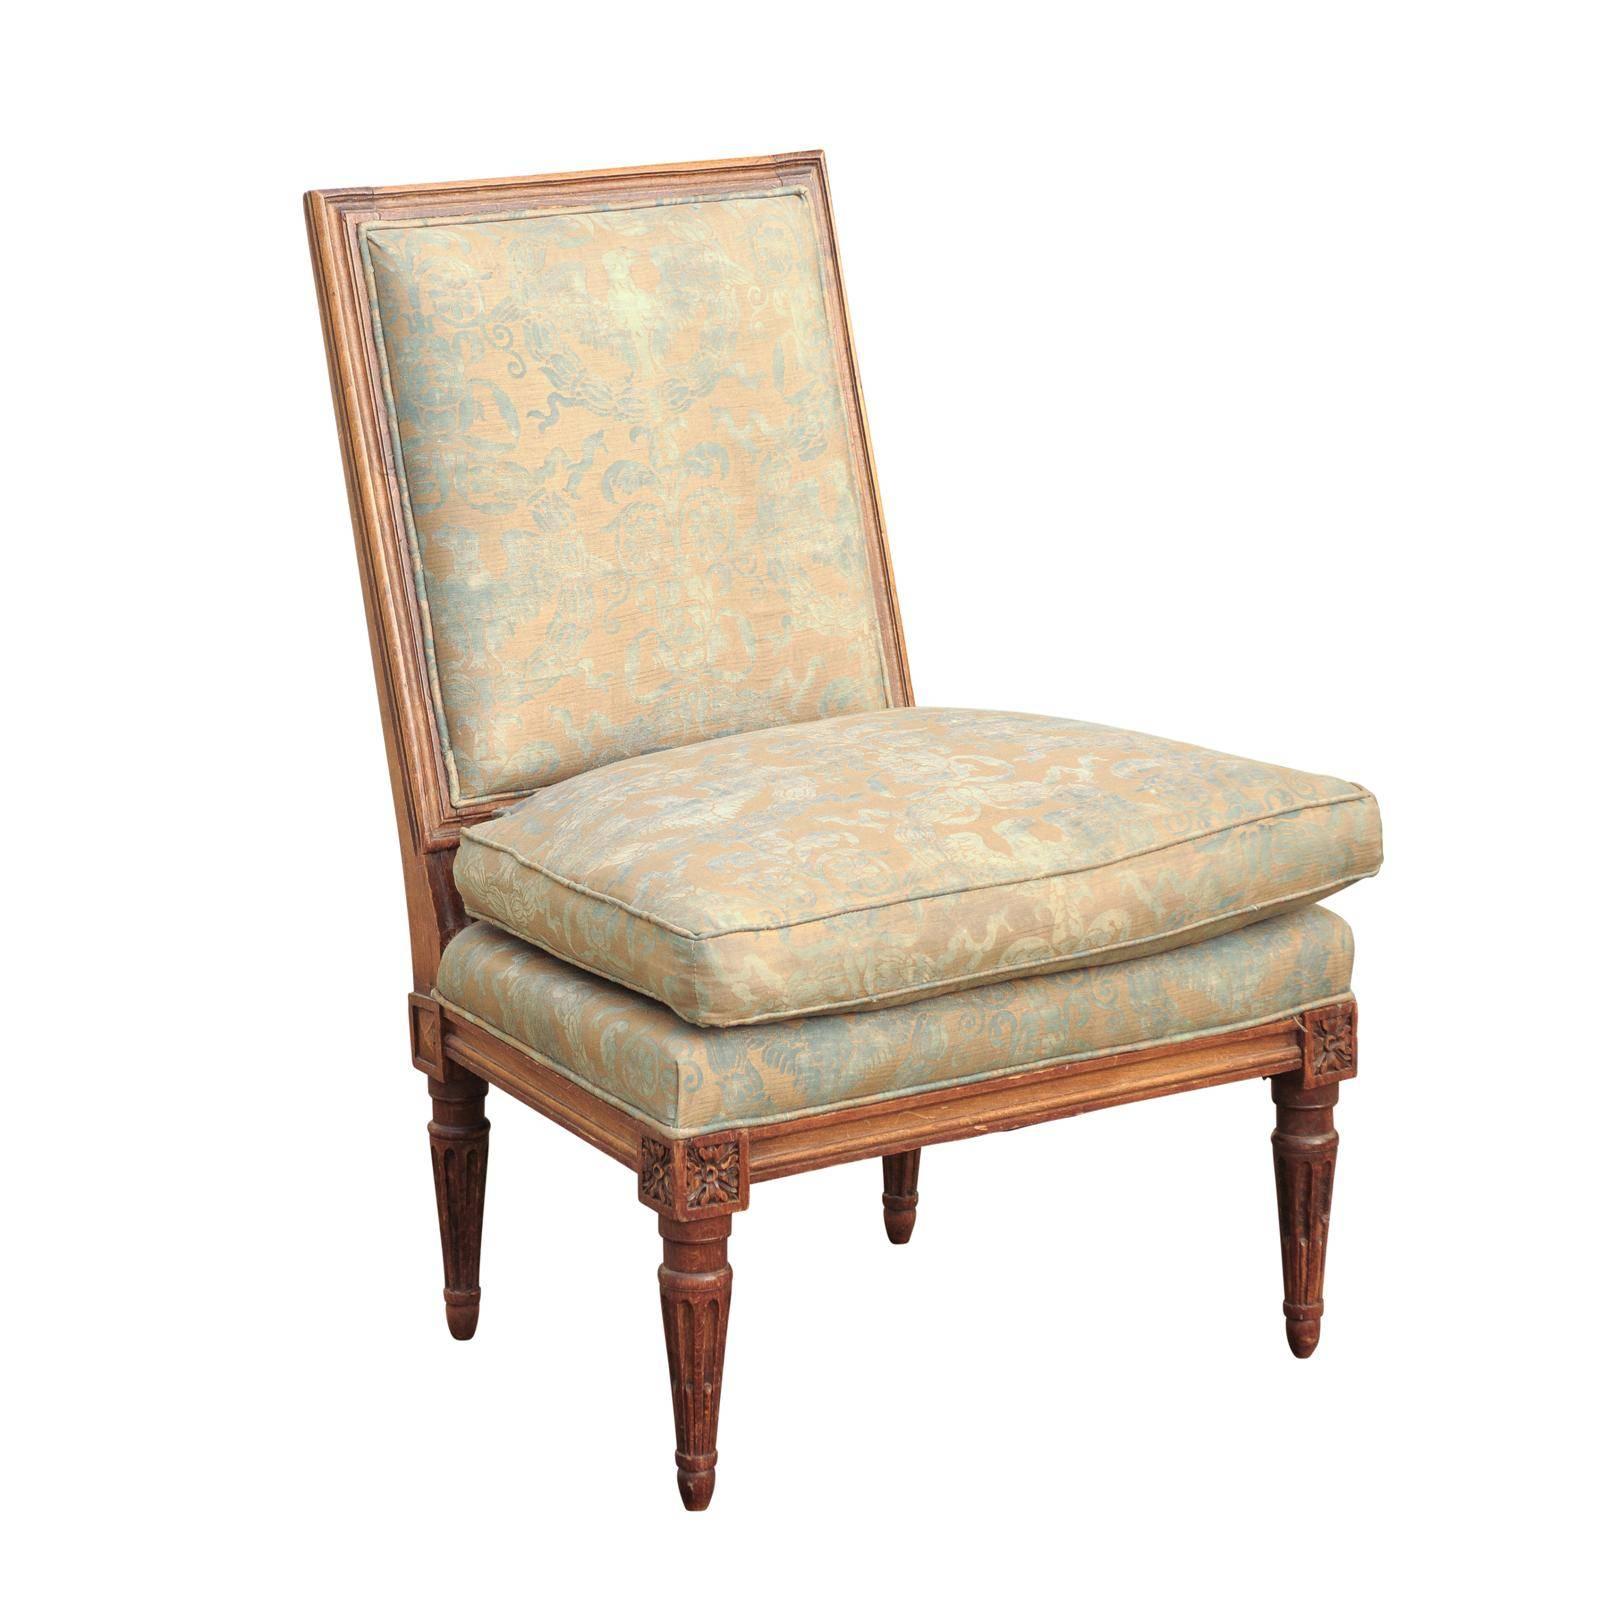 French Turn of the Century Louis XVI Style Slipper Chair with Fortuny Fabric